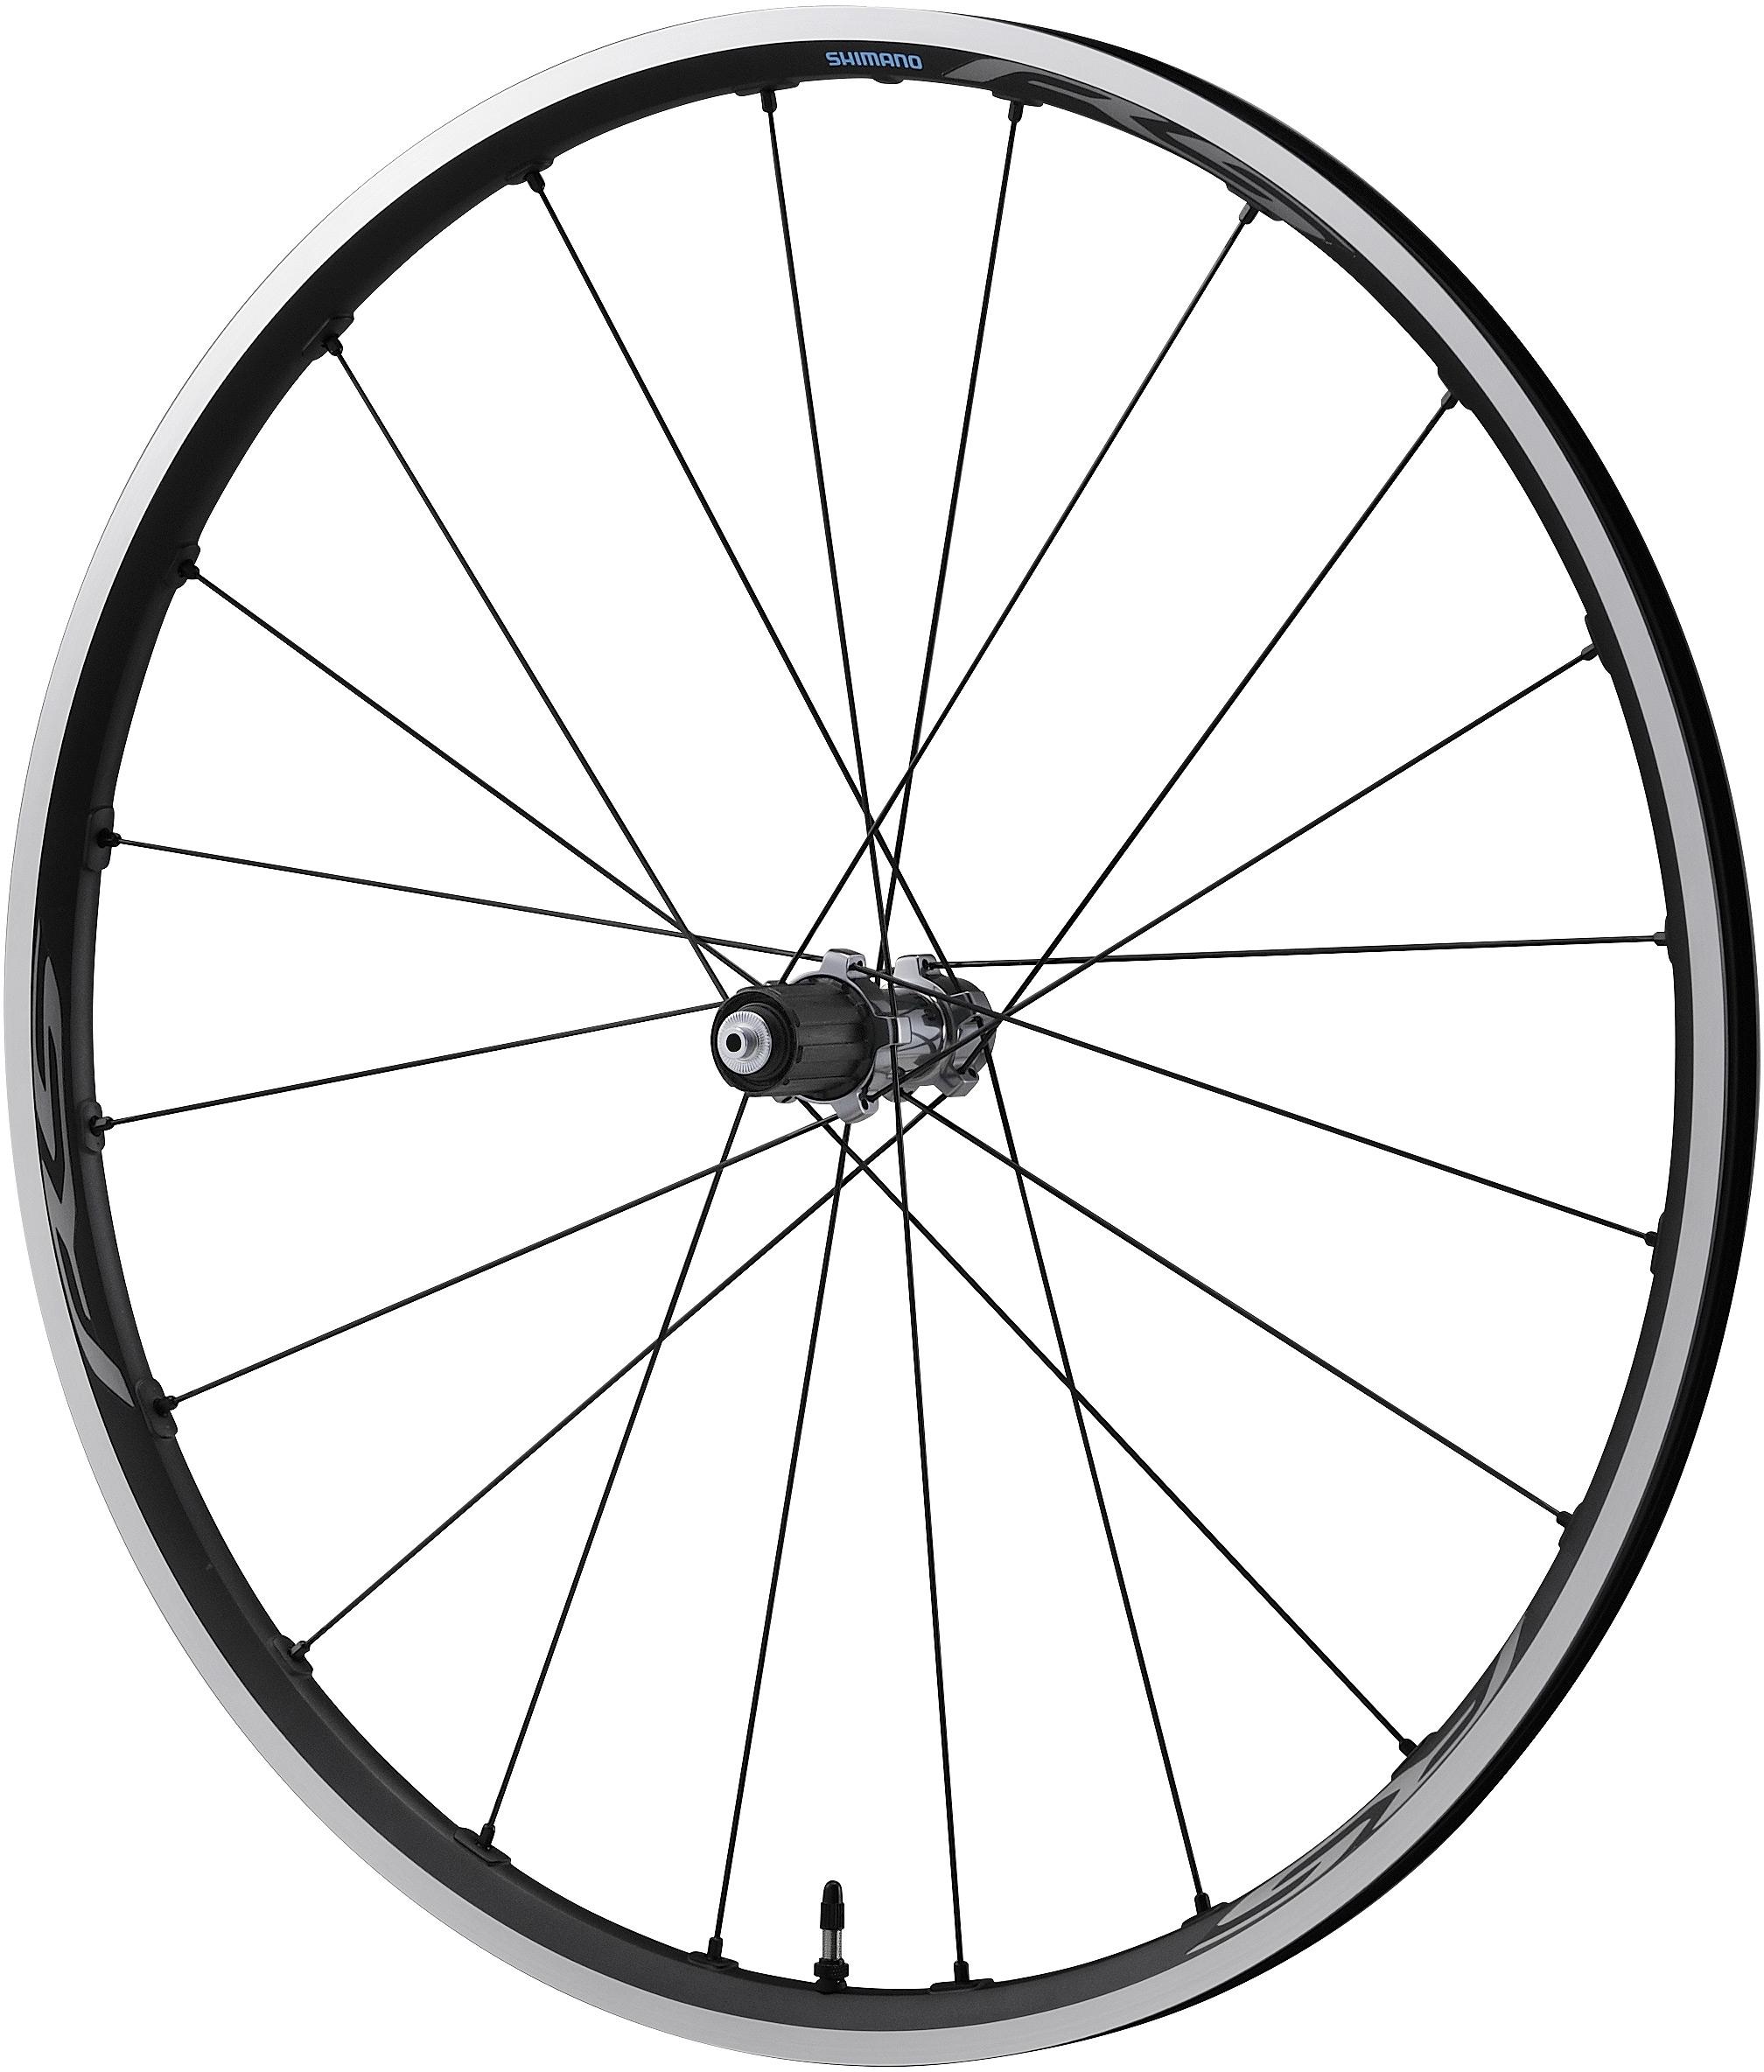 Rs500-Tl Tubeless Compatible Clincher, 9/10/11-Speed, Rear 130 Mm Q/R, Grey